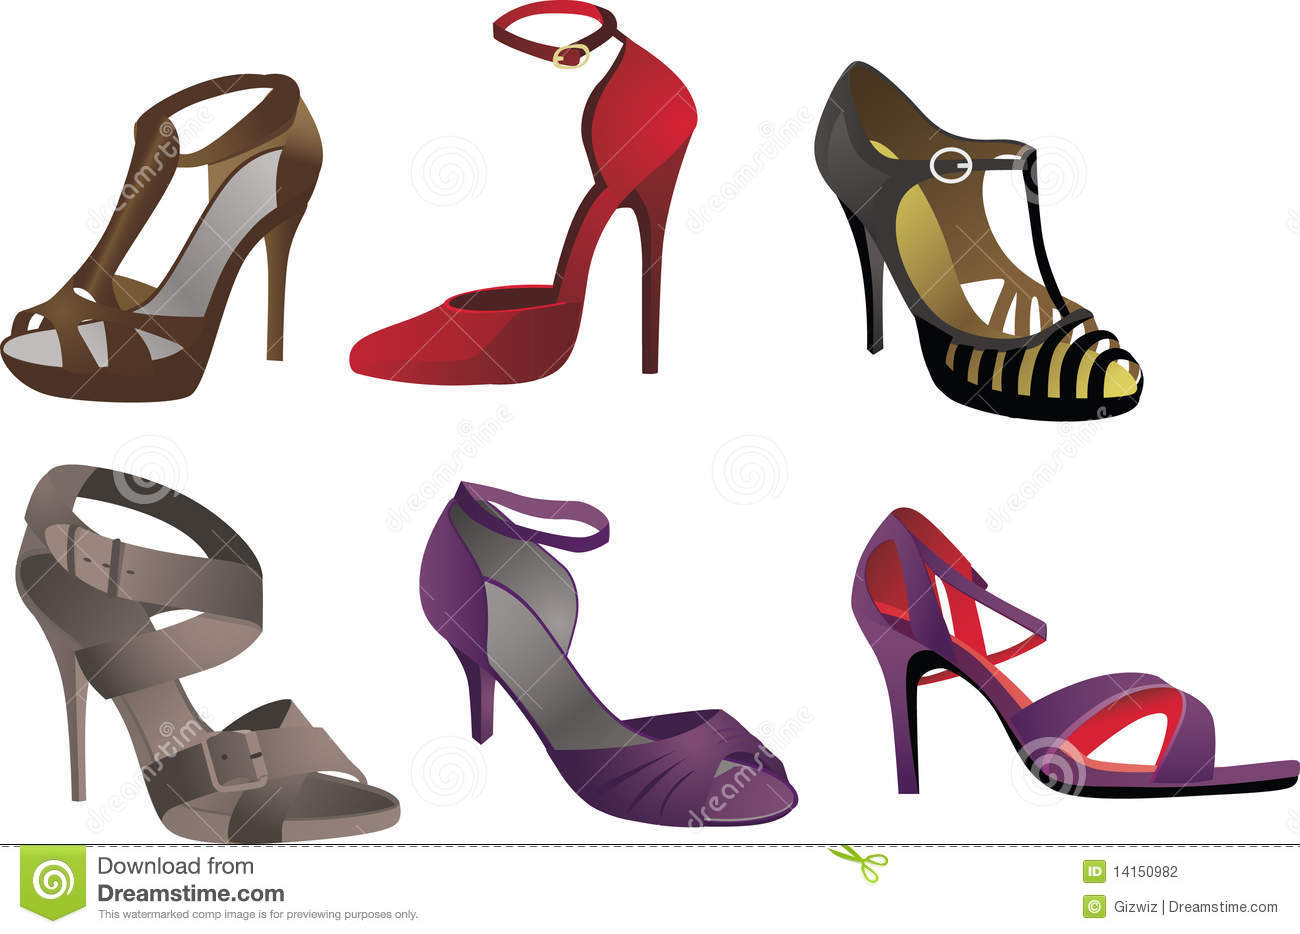 Different Types Of Fashionable Heels Pumps And Stilettos With Straps